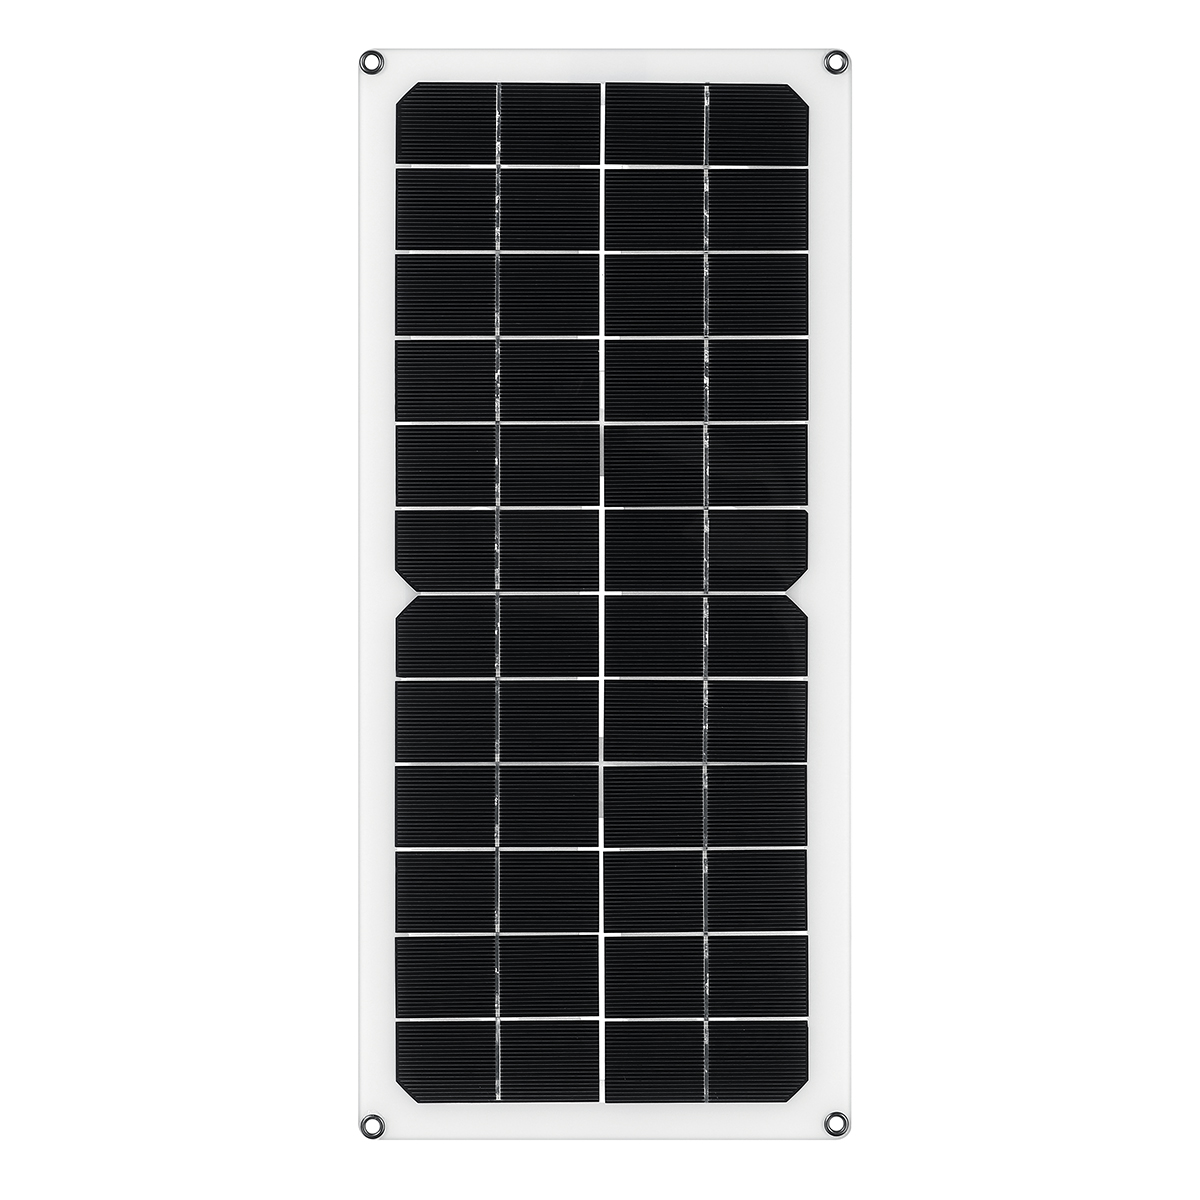 30W-12V-Solar-Panel-DC-5V-USB-Power-Battery-Charger-Portable-Outdoor-Camping-Travel-1856152-8